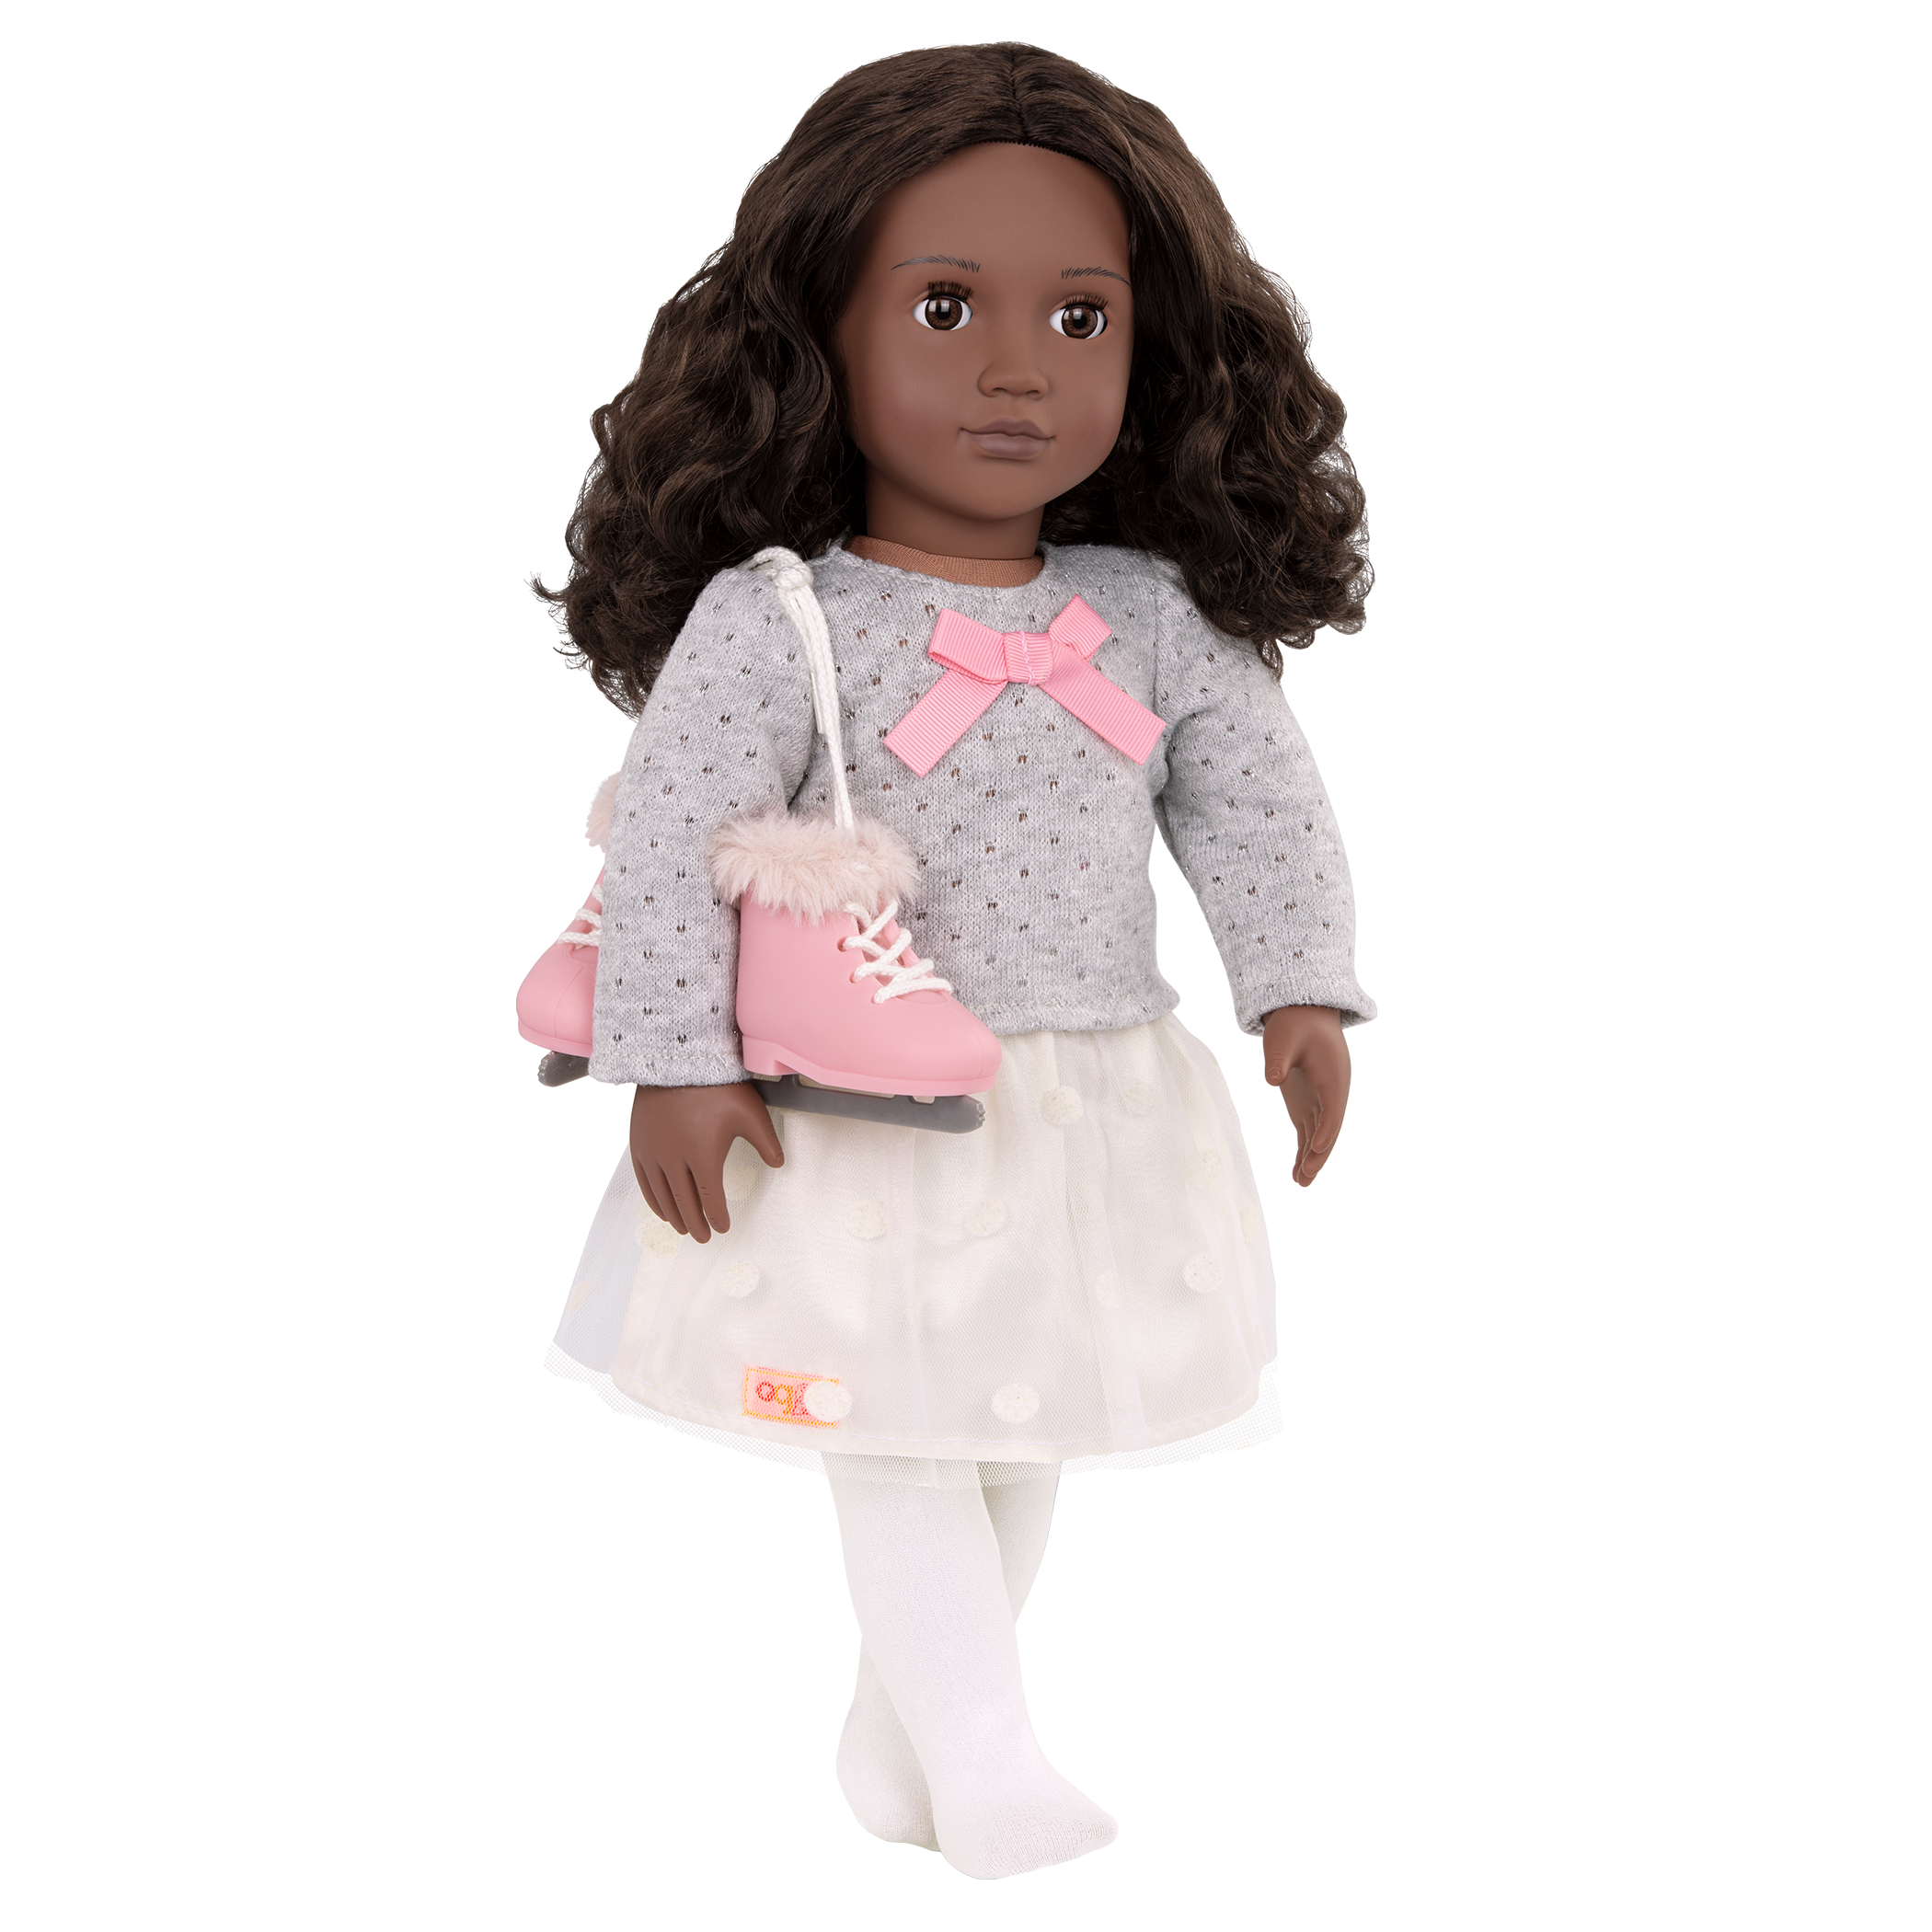 18-inch doll with brown hair, brown eyes and ice skates